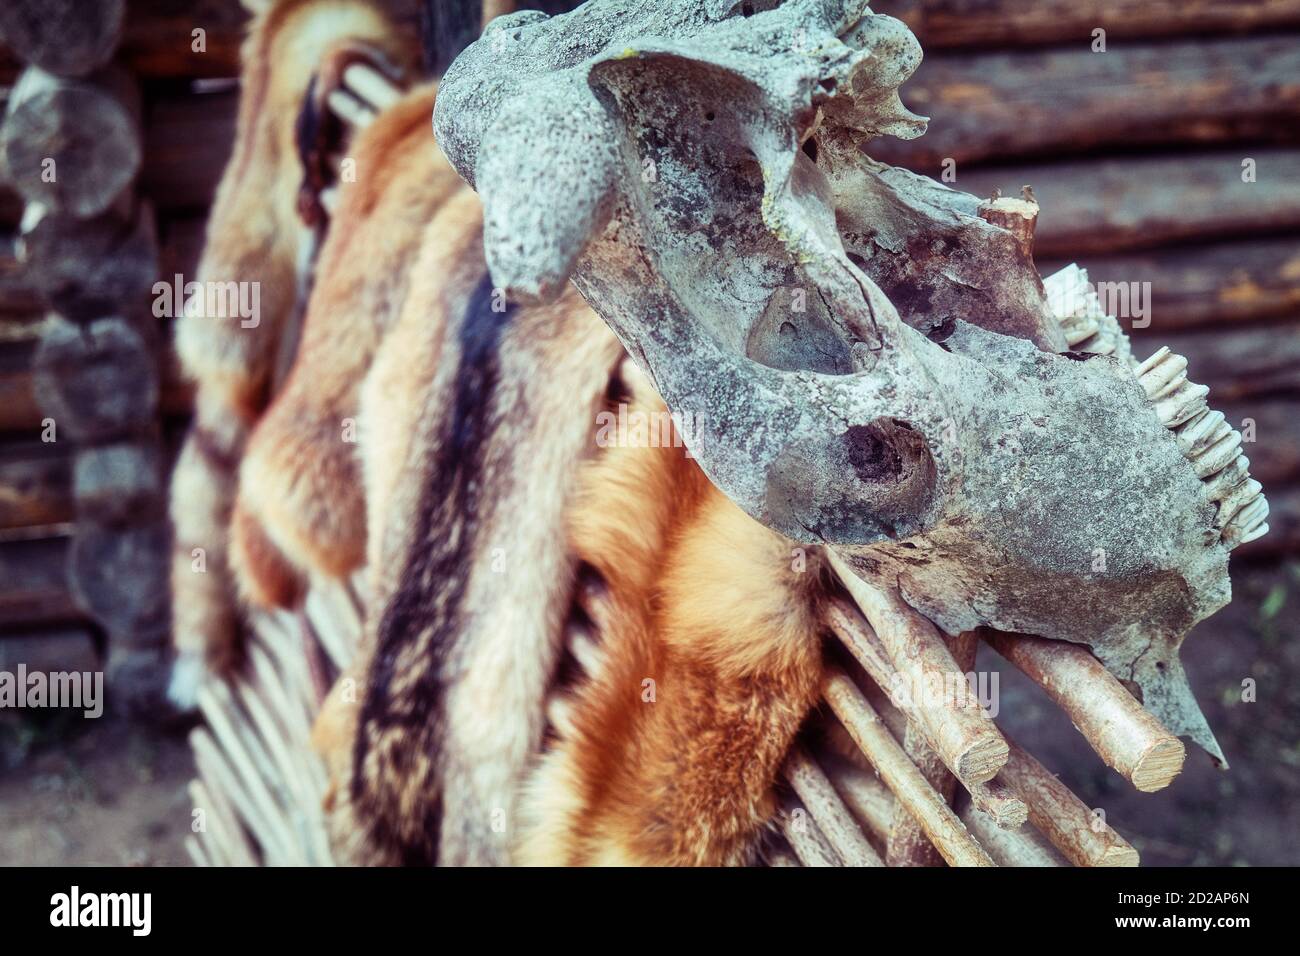 Countryside wattle on which hunters dry tanned skins. Animal skins on the fence and skulls with horns. Stock Photo